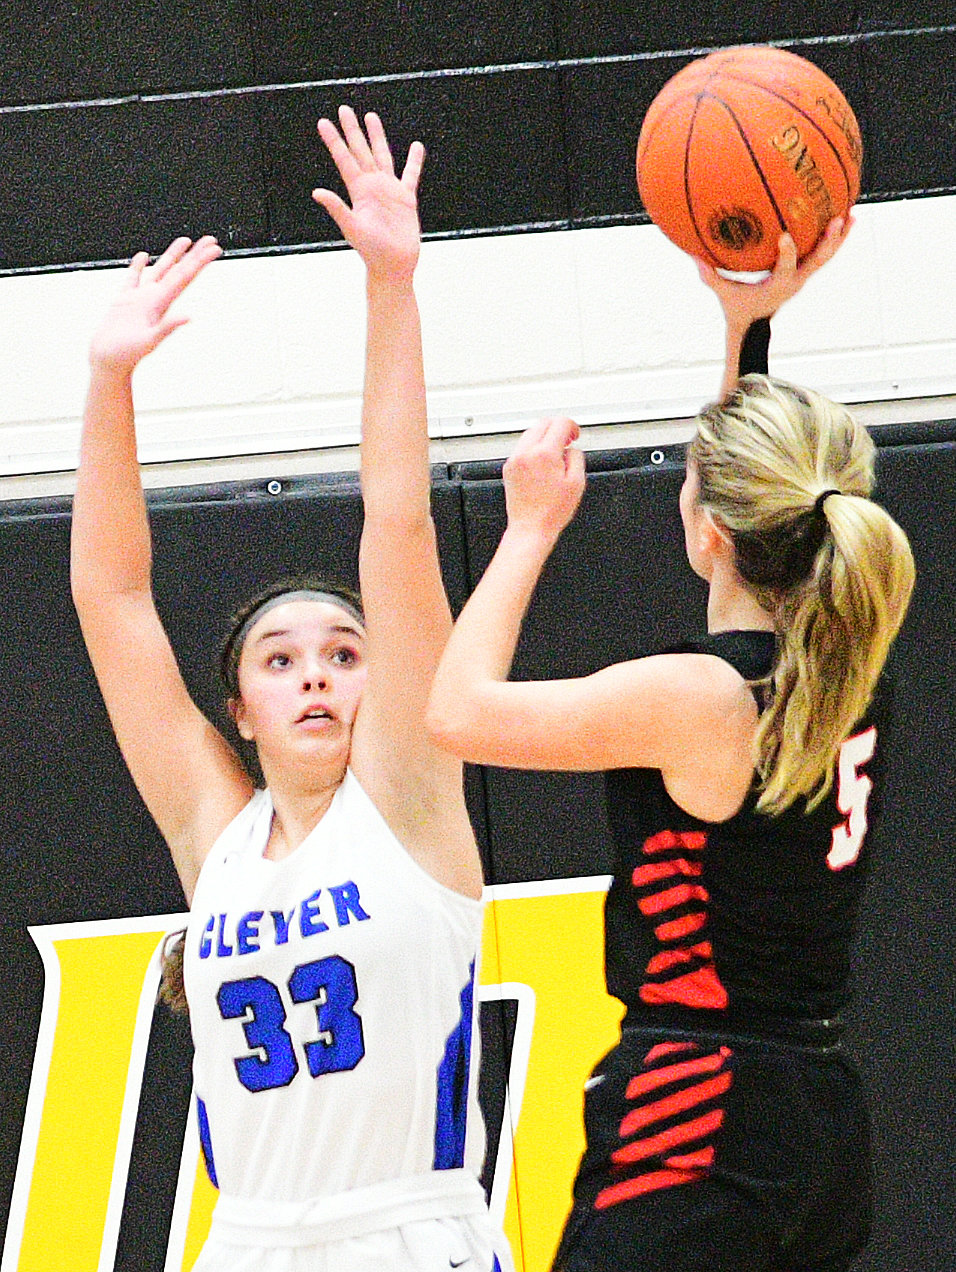 BAILEE MCCLANAHAN gets a hand in front of Ash Grove player’s shot.